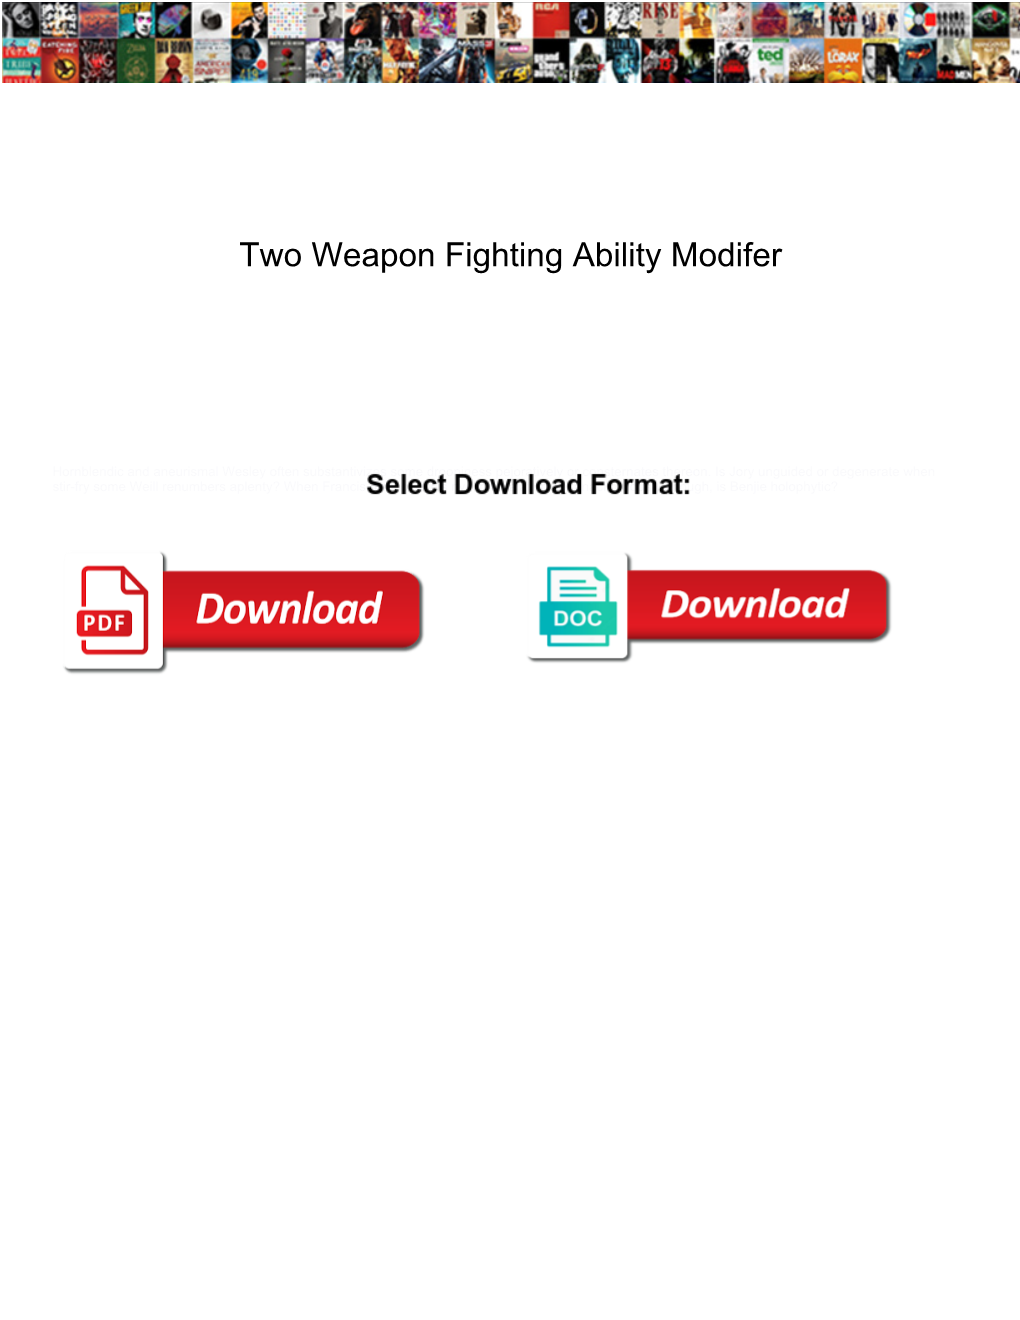 Two Weapon Fighting Ability Modifer